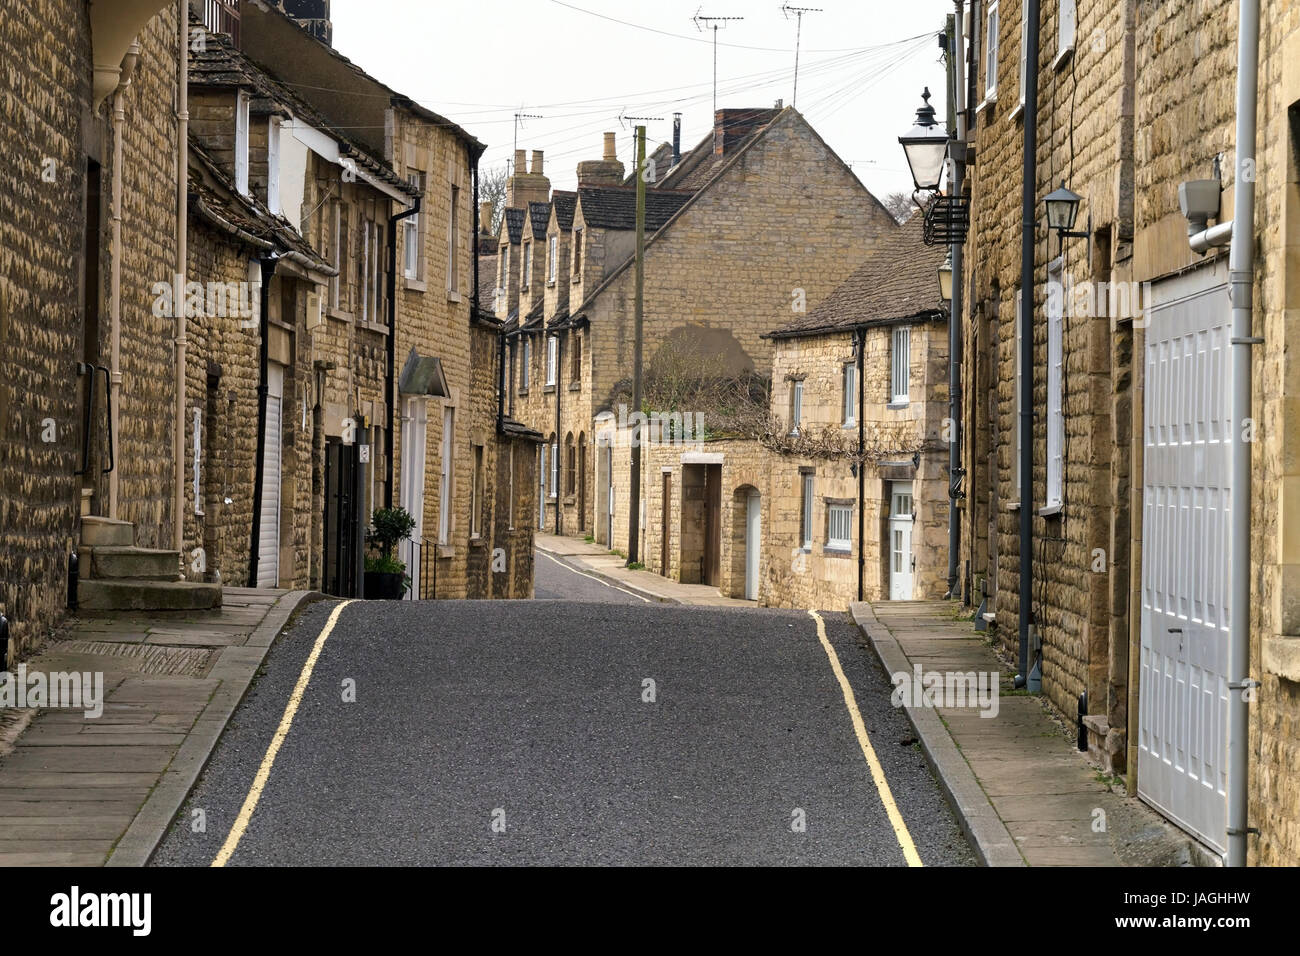 Narrow street with old stone cottages and houses, Austin Street, Stamford, Lincolnshire, England, UK Stock Photo